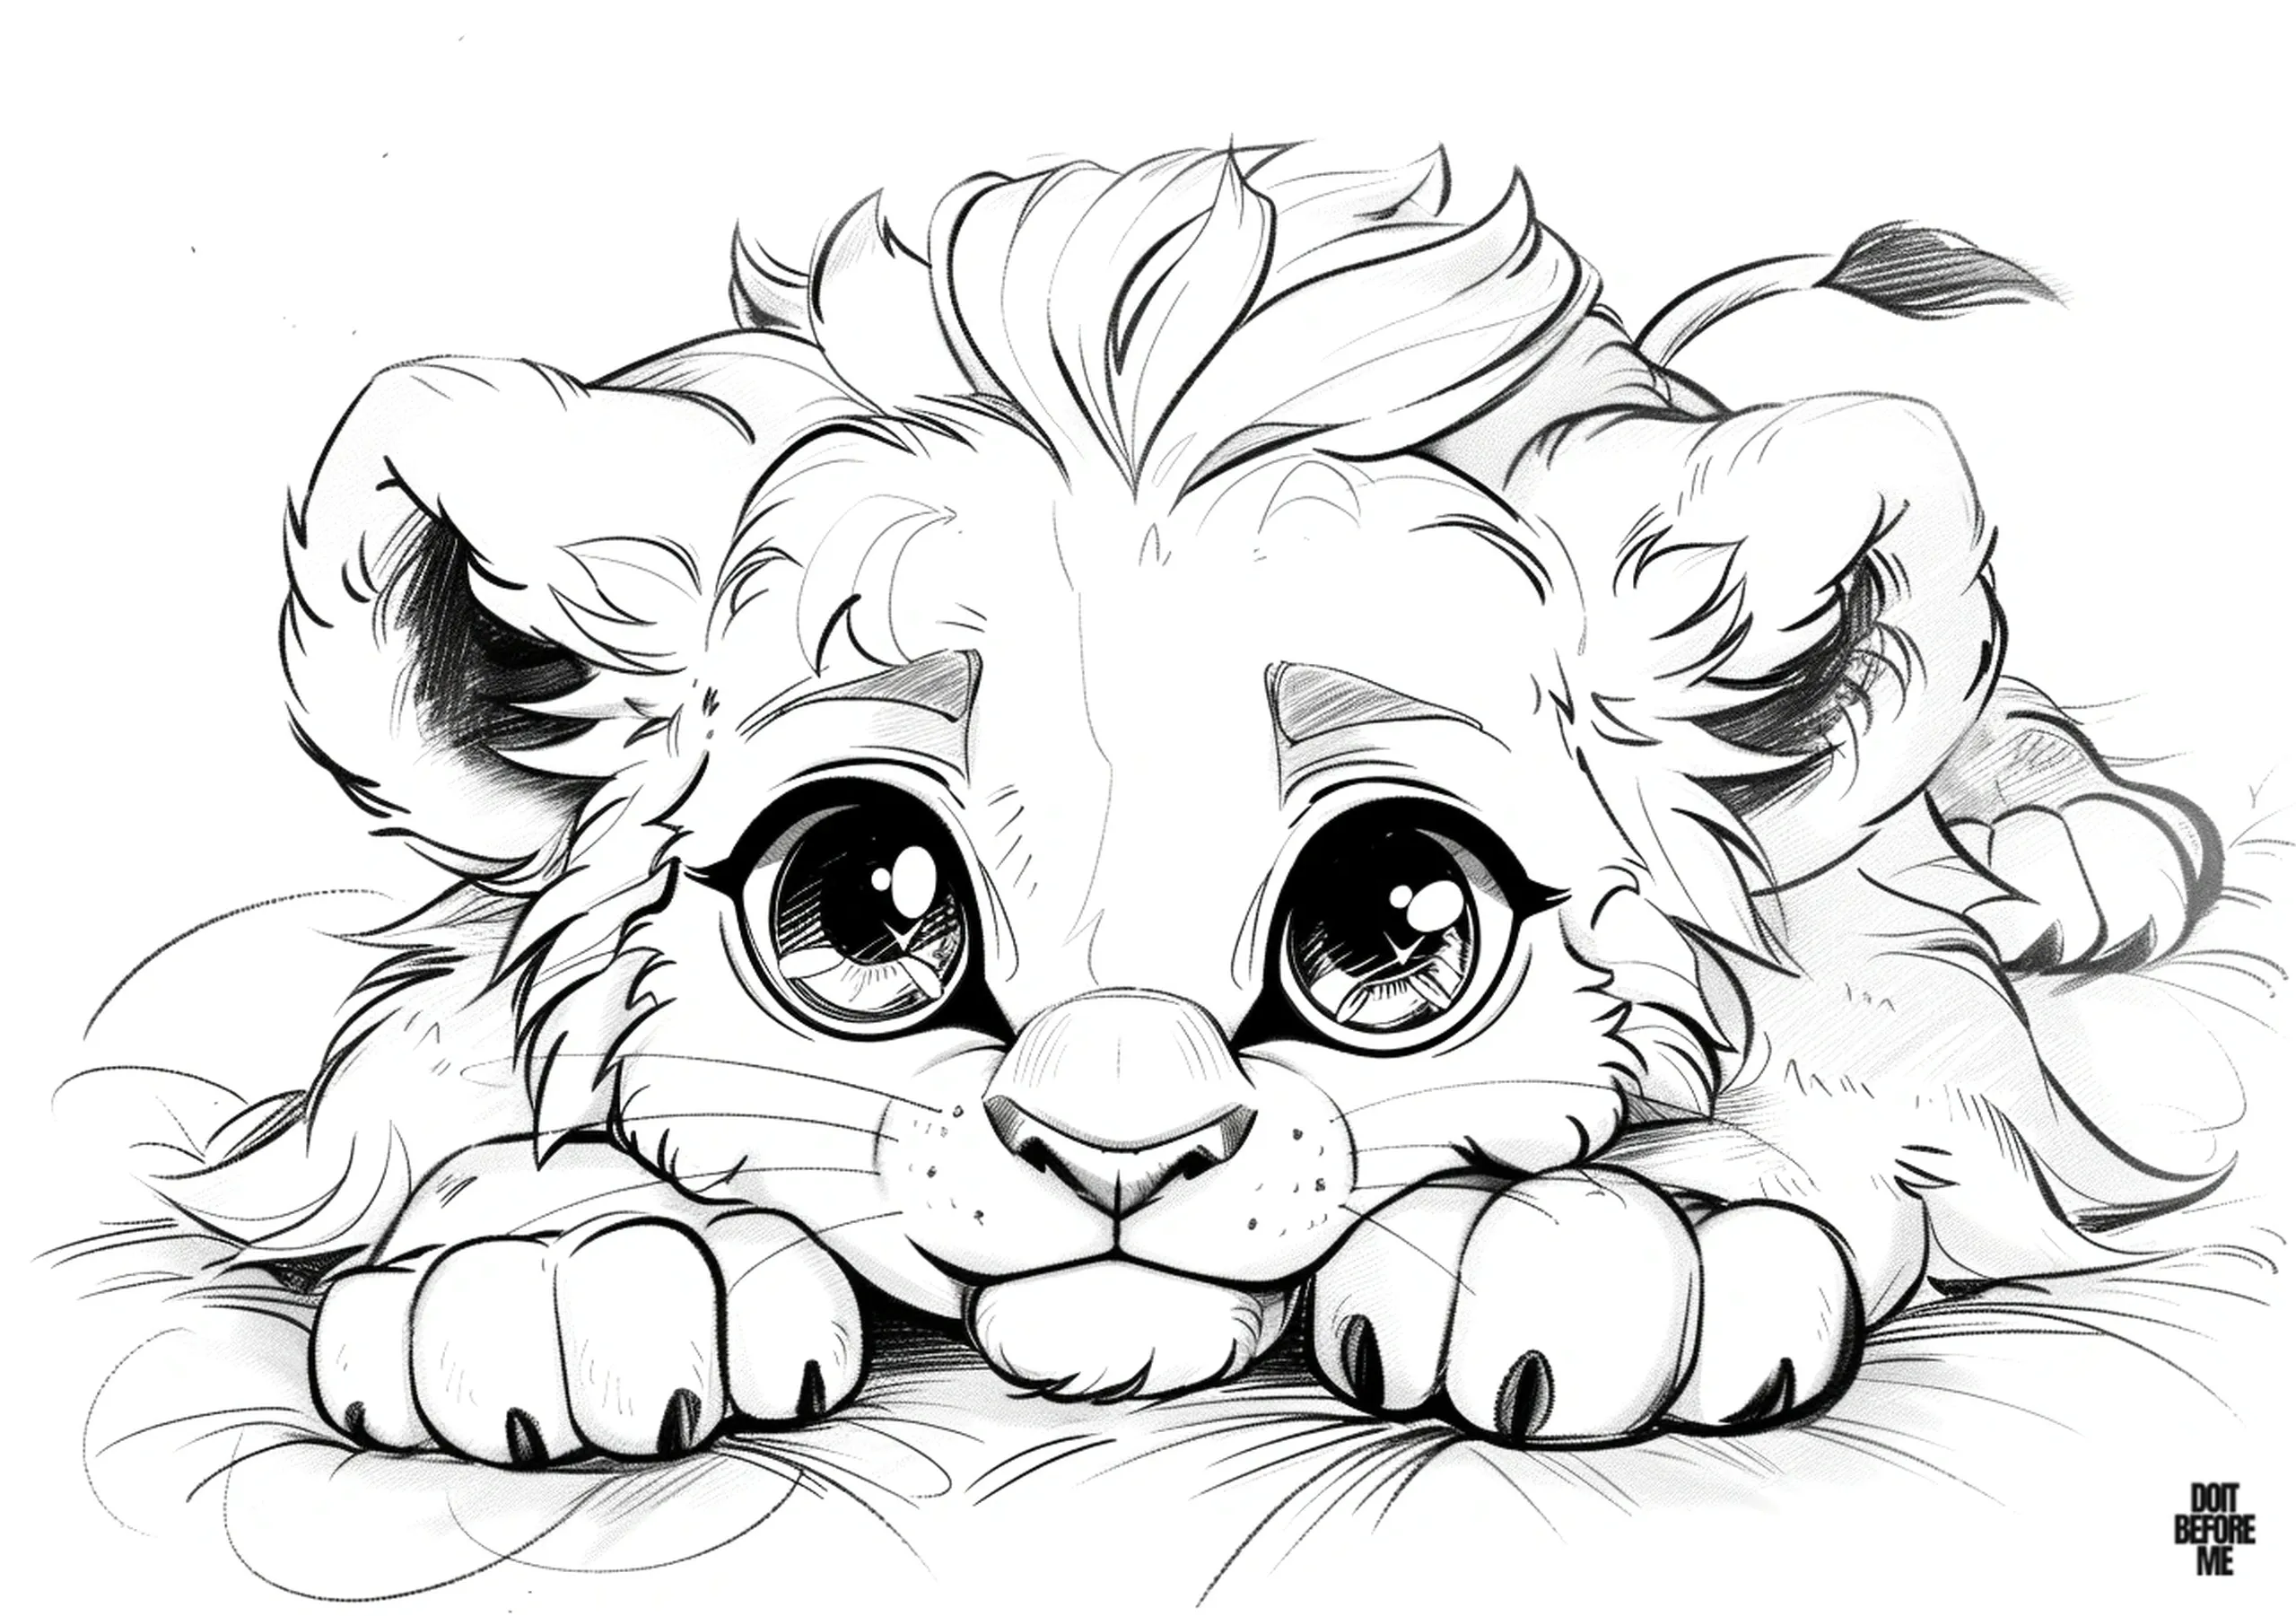 Printable coloring page featuring a cute baby lion cub with big eyes and an innocent expression, lying on the ground, and displaying its face and tiny paws. Since it is a cute and slightly detailed design, it is suitable for both adults and kids to color.